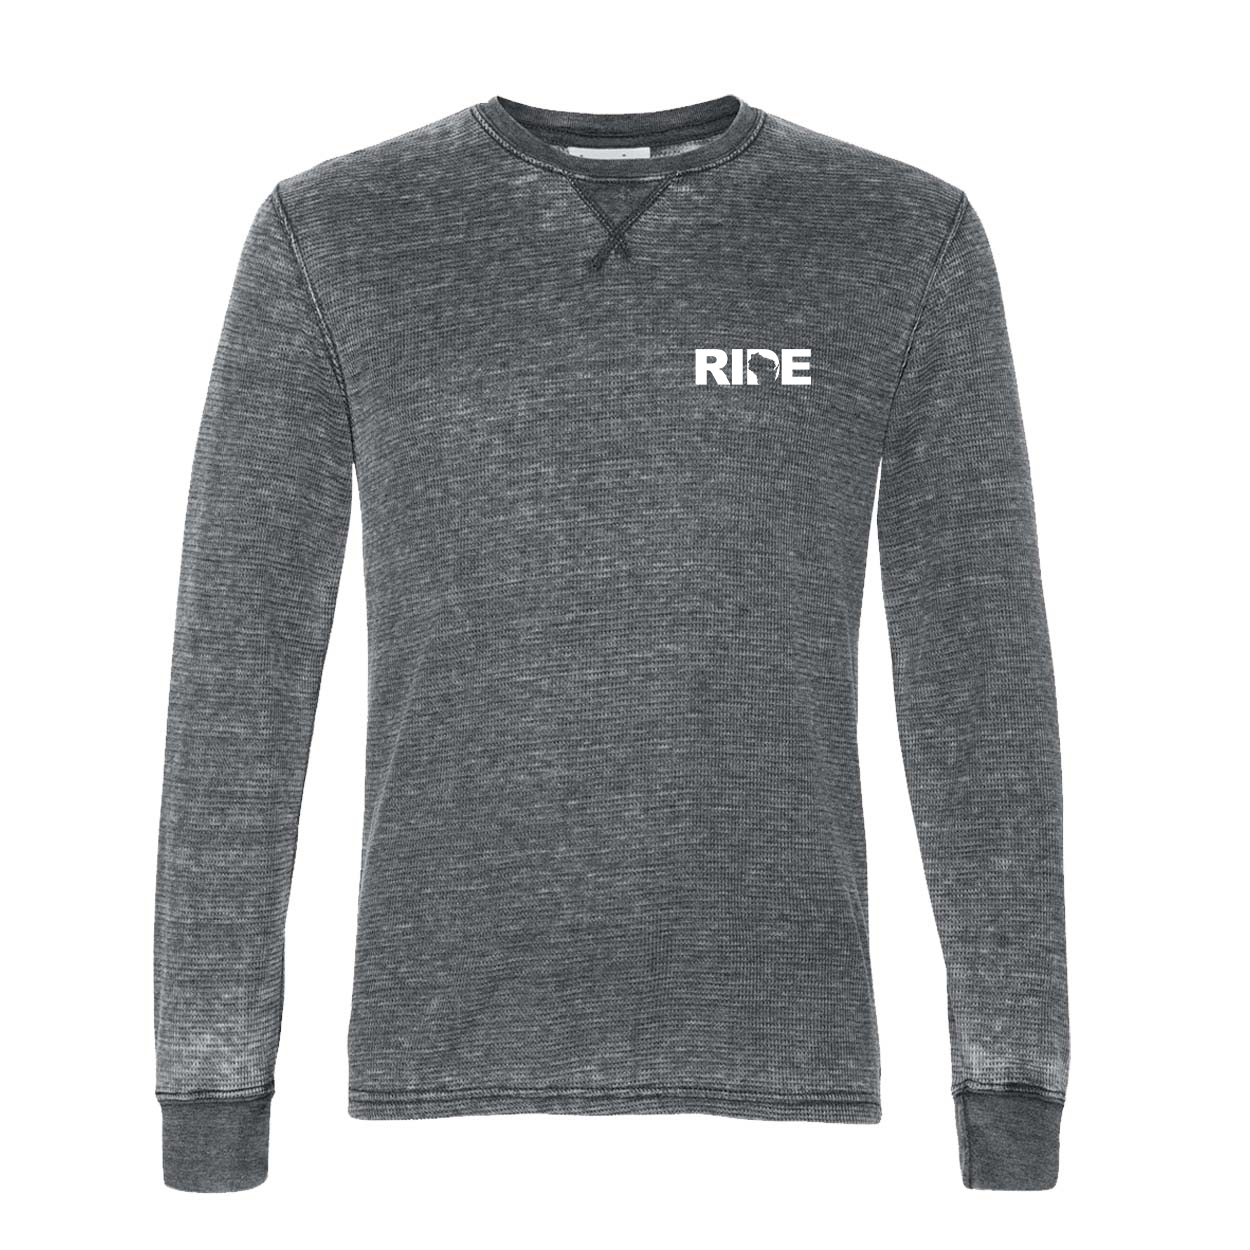 Ride Wisconsin Long Sleeve Thermal Shirt Heather Charcoal (White Logo)